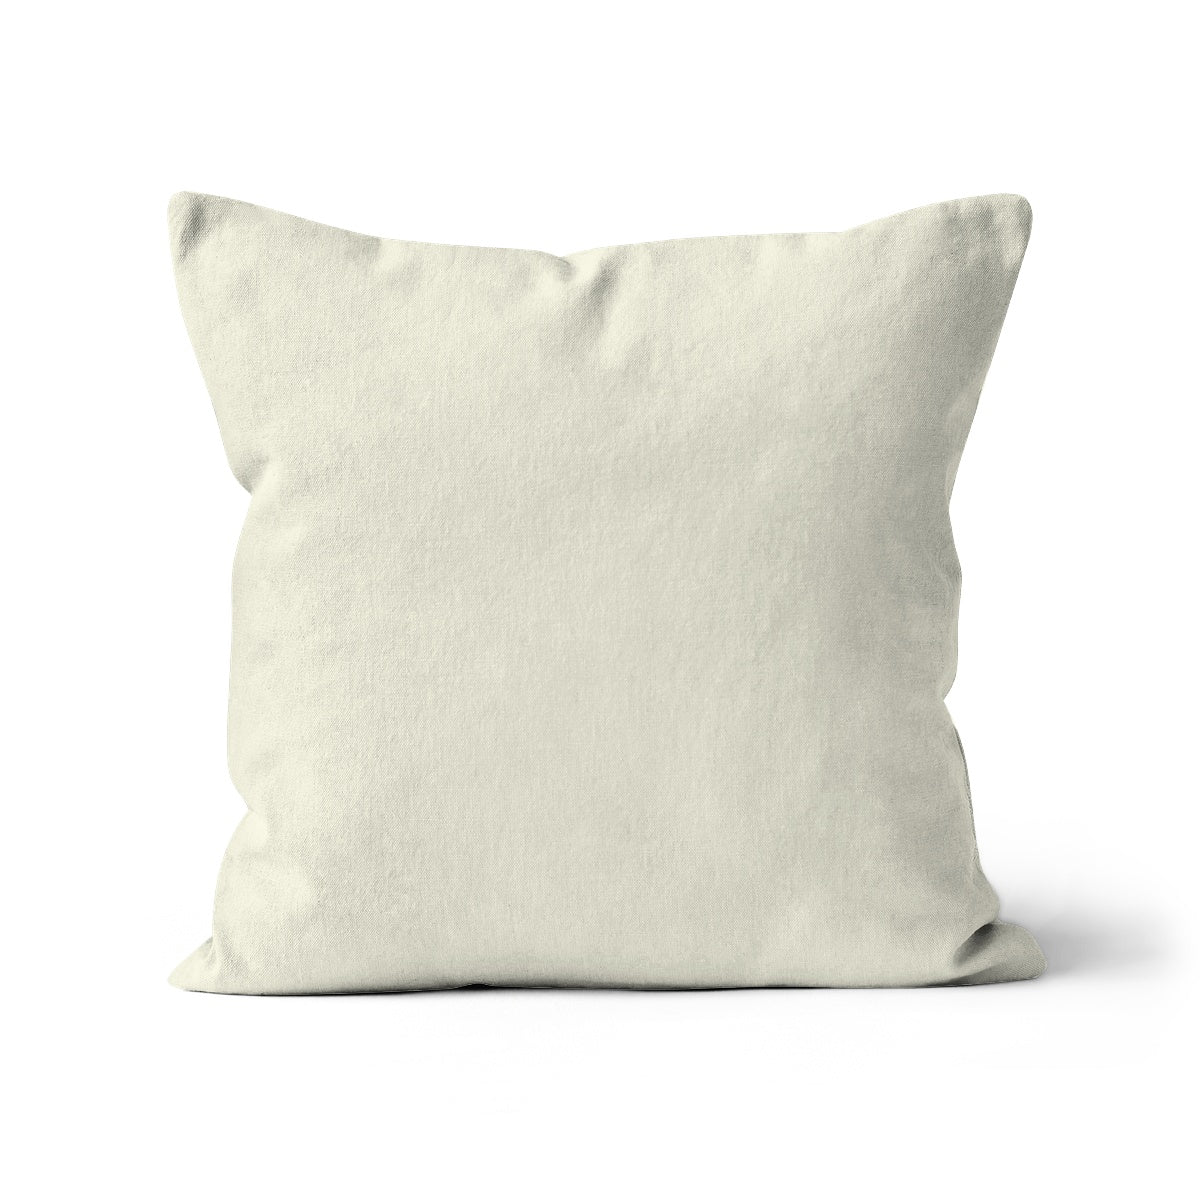 Off-white cotton cushion cover. Cream square scatter cushion cover. Made with organic cotton in the UK. Our sustainable homeware Plain cushion covers are printed with Eco-friendly water-based inks. Removable and machine-washable cushion covers made in the UK using eco-friendly inks.